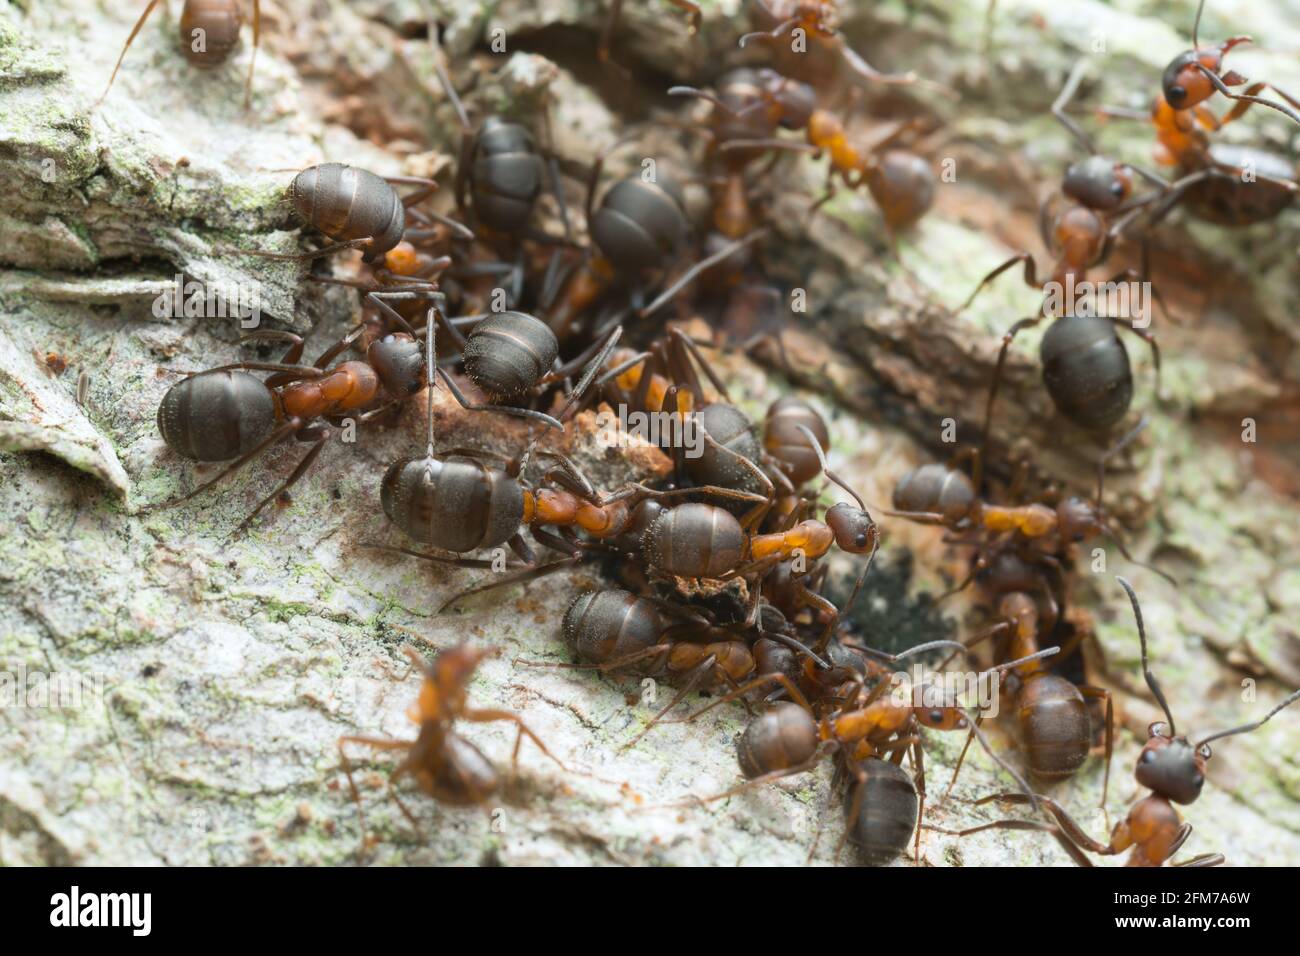 Many wood ants, Formica ants on wood Stock Photo